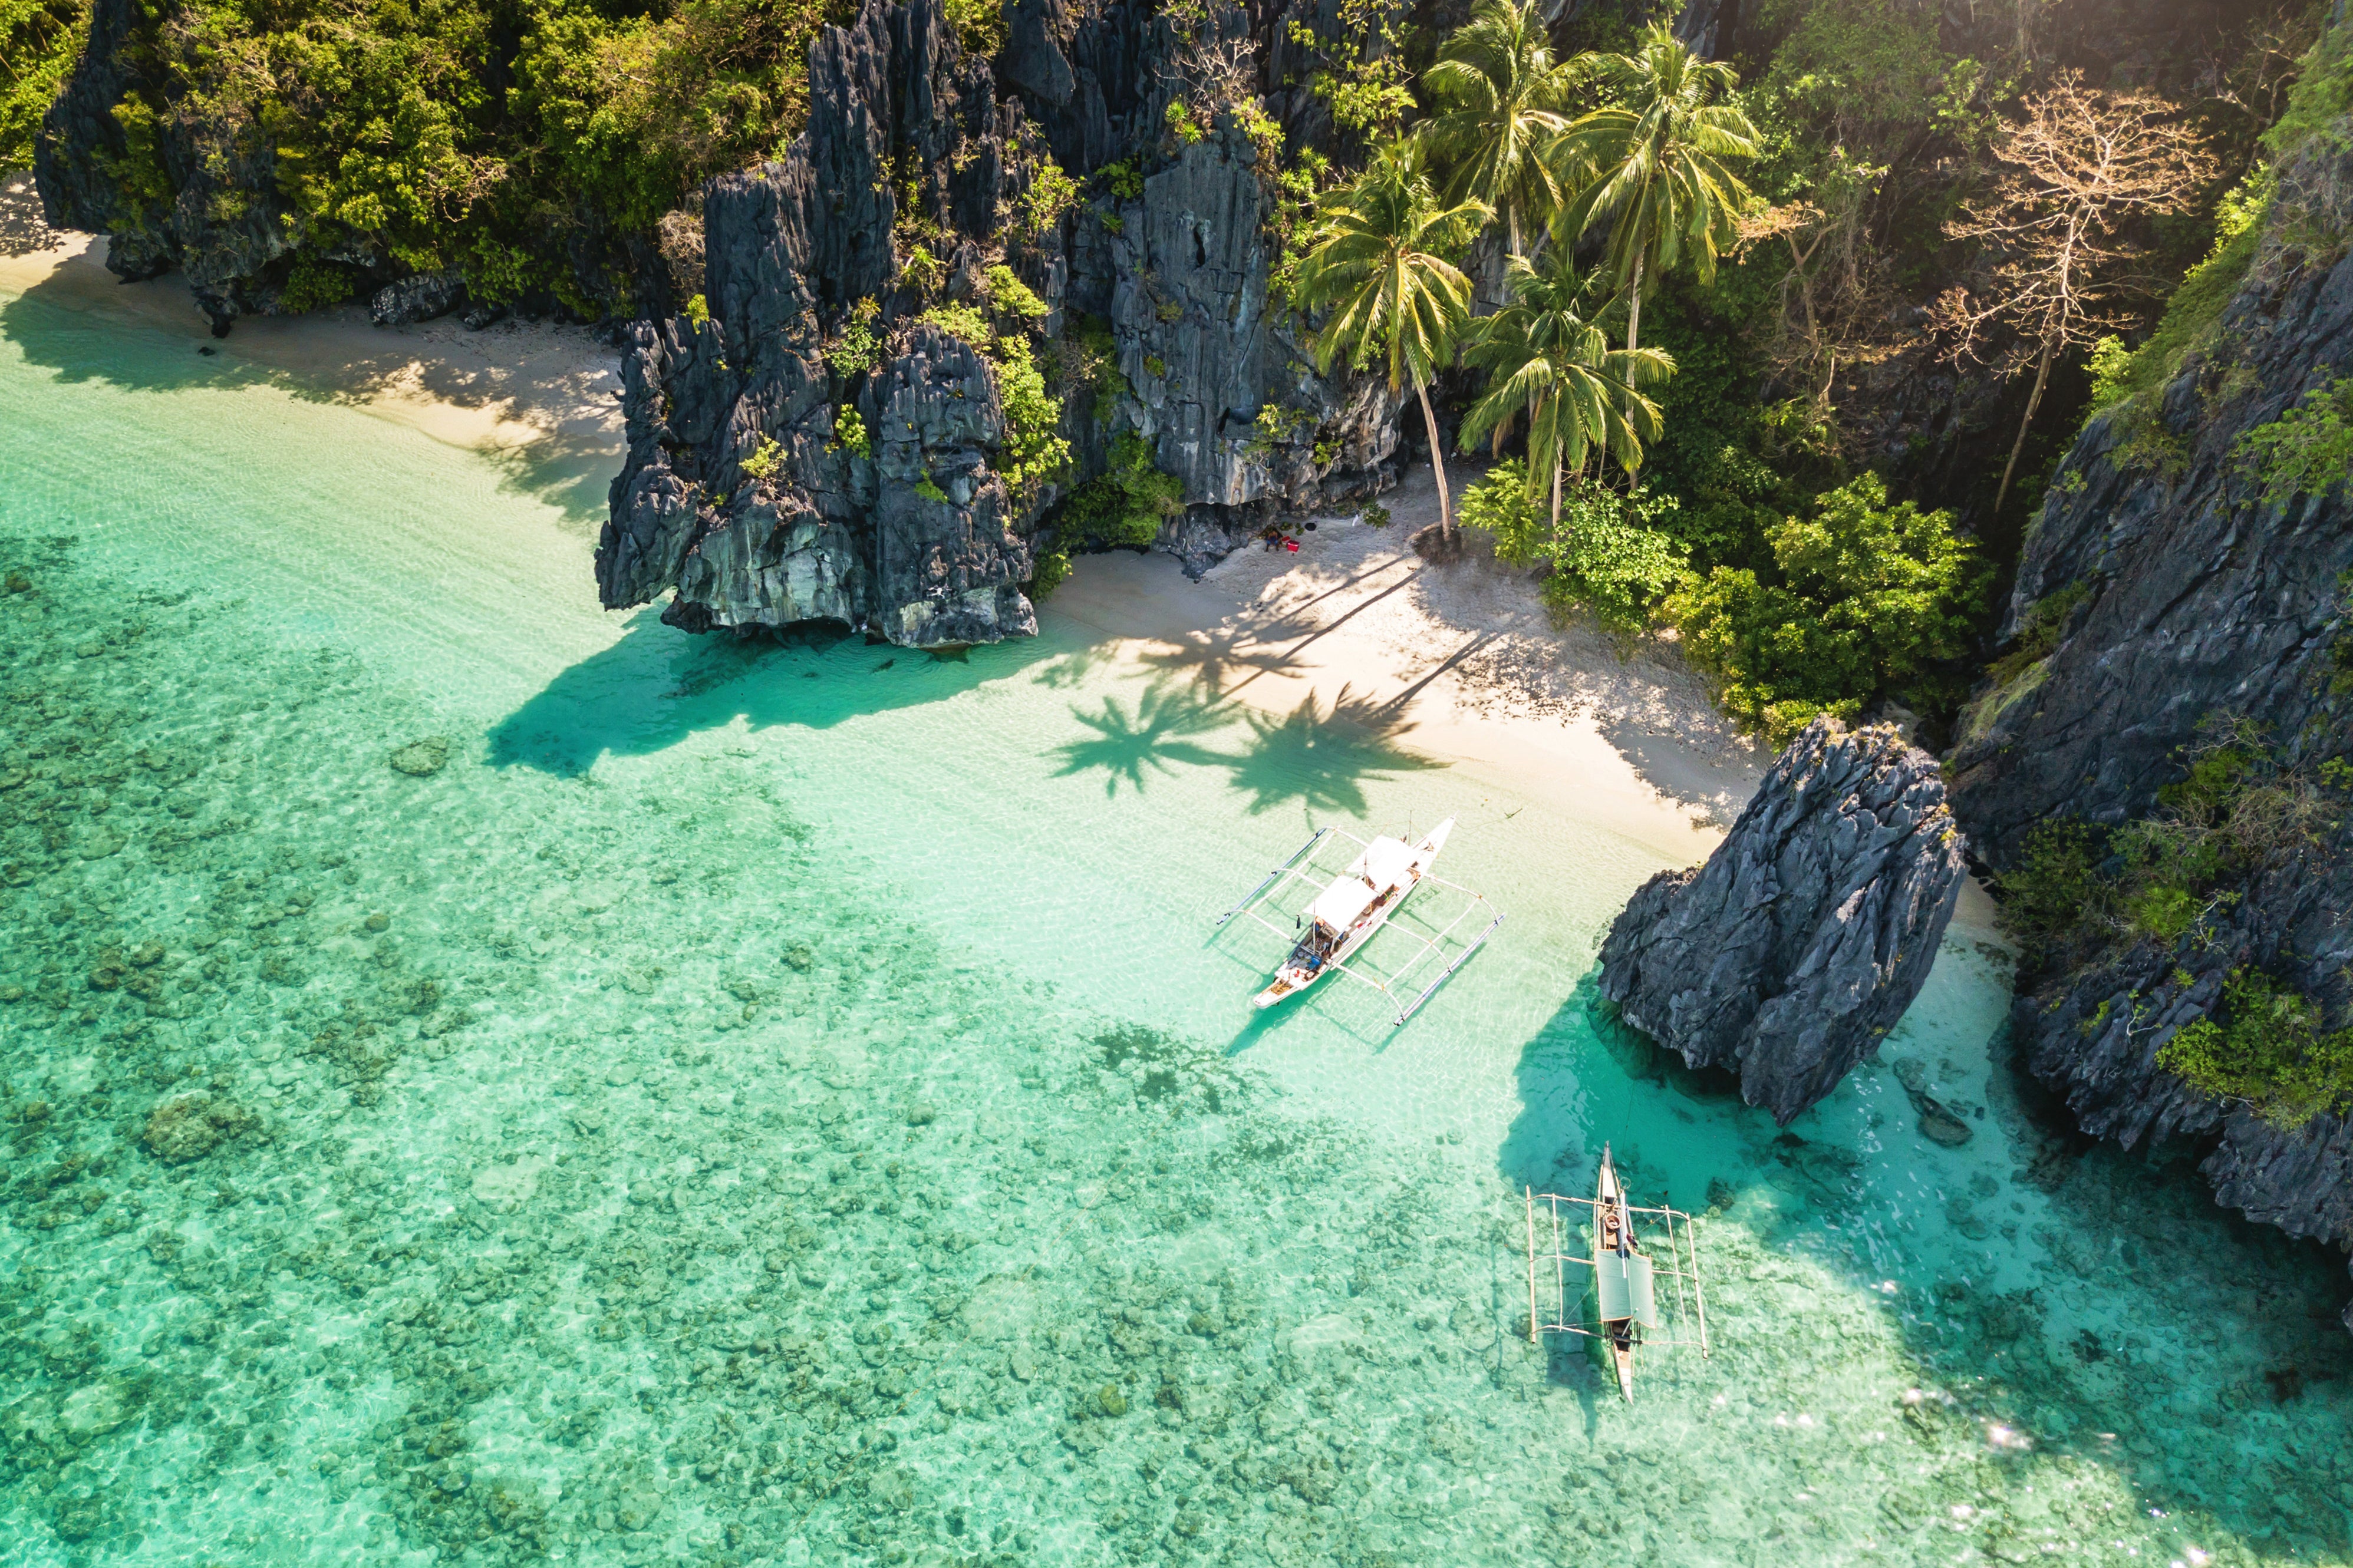 With its blue lagoons and limestone cliffs, it’s easy to see why Palawan is consistently voted one of the <a href="https://www.cntraveler.com/galleries/2014-10-20/top-30-islands-in-the-world-readers-choice-awards-2014?mbid=synd_msn_rss&utm_source=msn&utm_medium=syndication">best islands in the world</a> by our readers. It is also home to the otherworldly Puerto Princesa Subterranean River, a UNESCO World Heritage Site that travels five miles through an underground cave system.<p>Sign up to receive the latest news, expert tips, and inspiration on all things travel</p><a href="https://www.cntraveler.com/newsletter/the-daily?sourceCode=msnsend">Inspire Me</a>